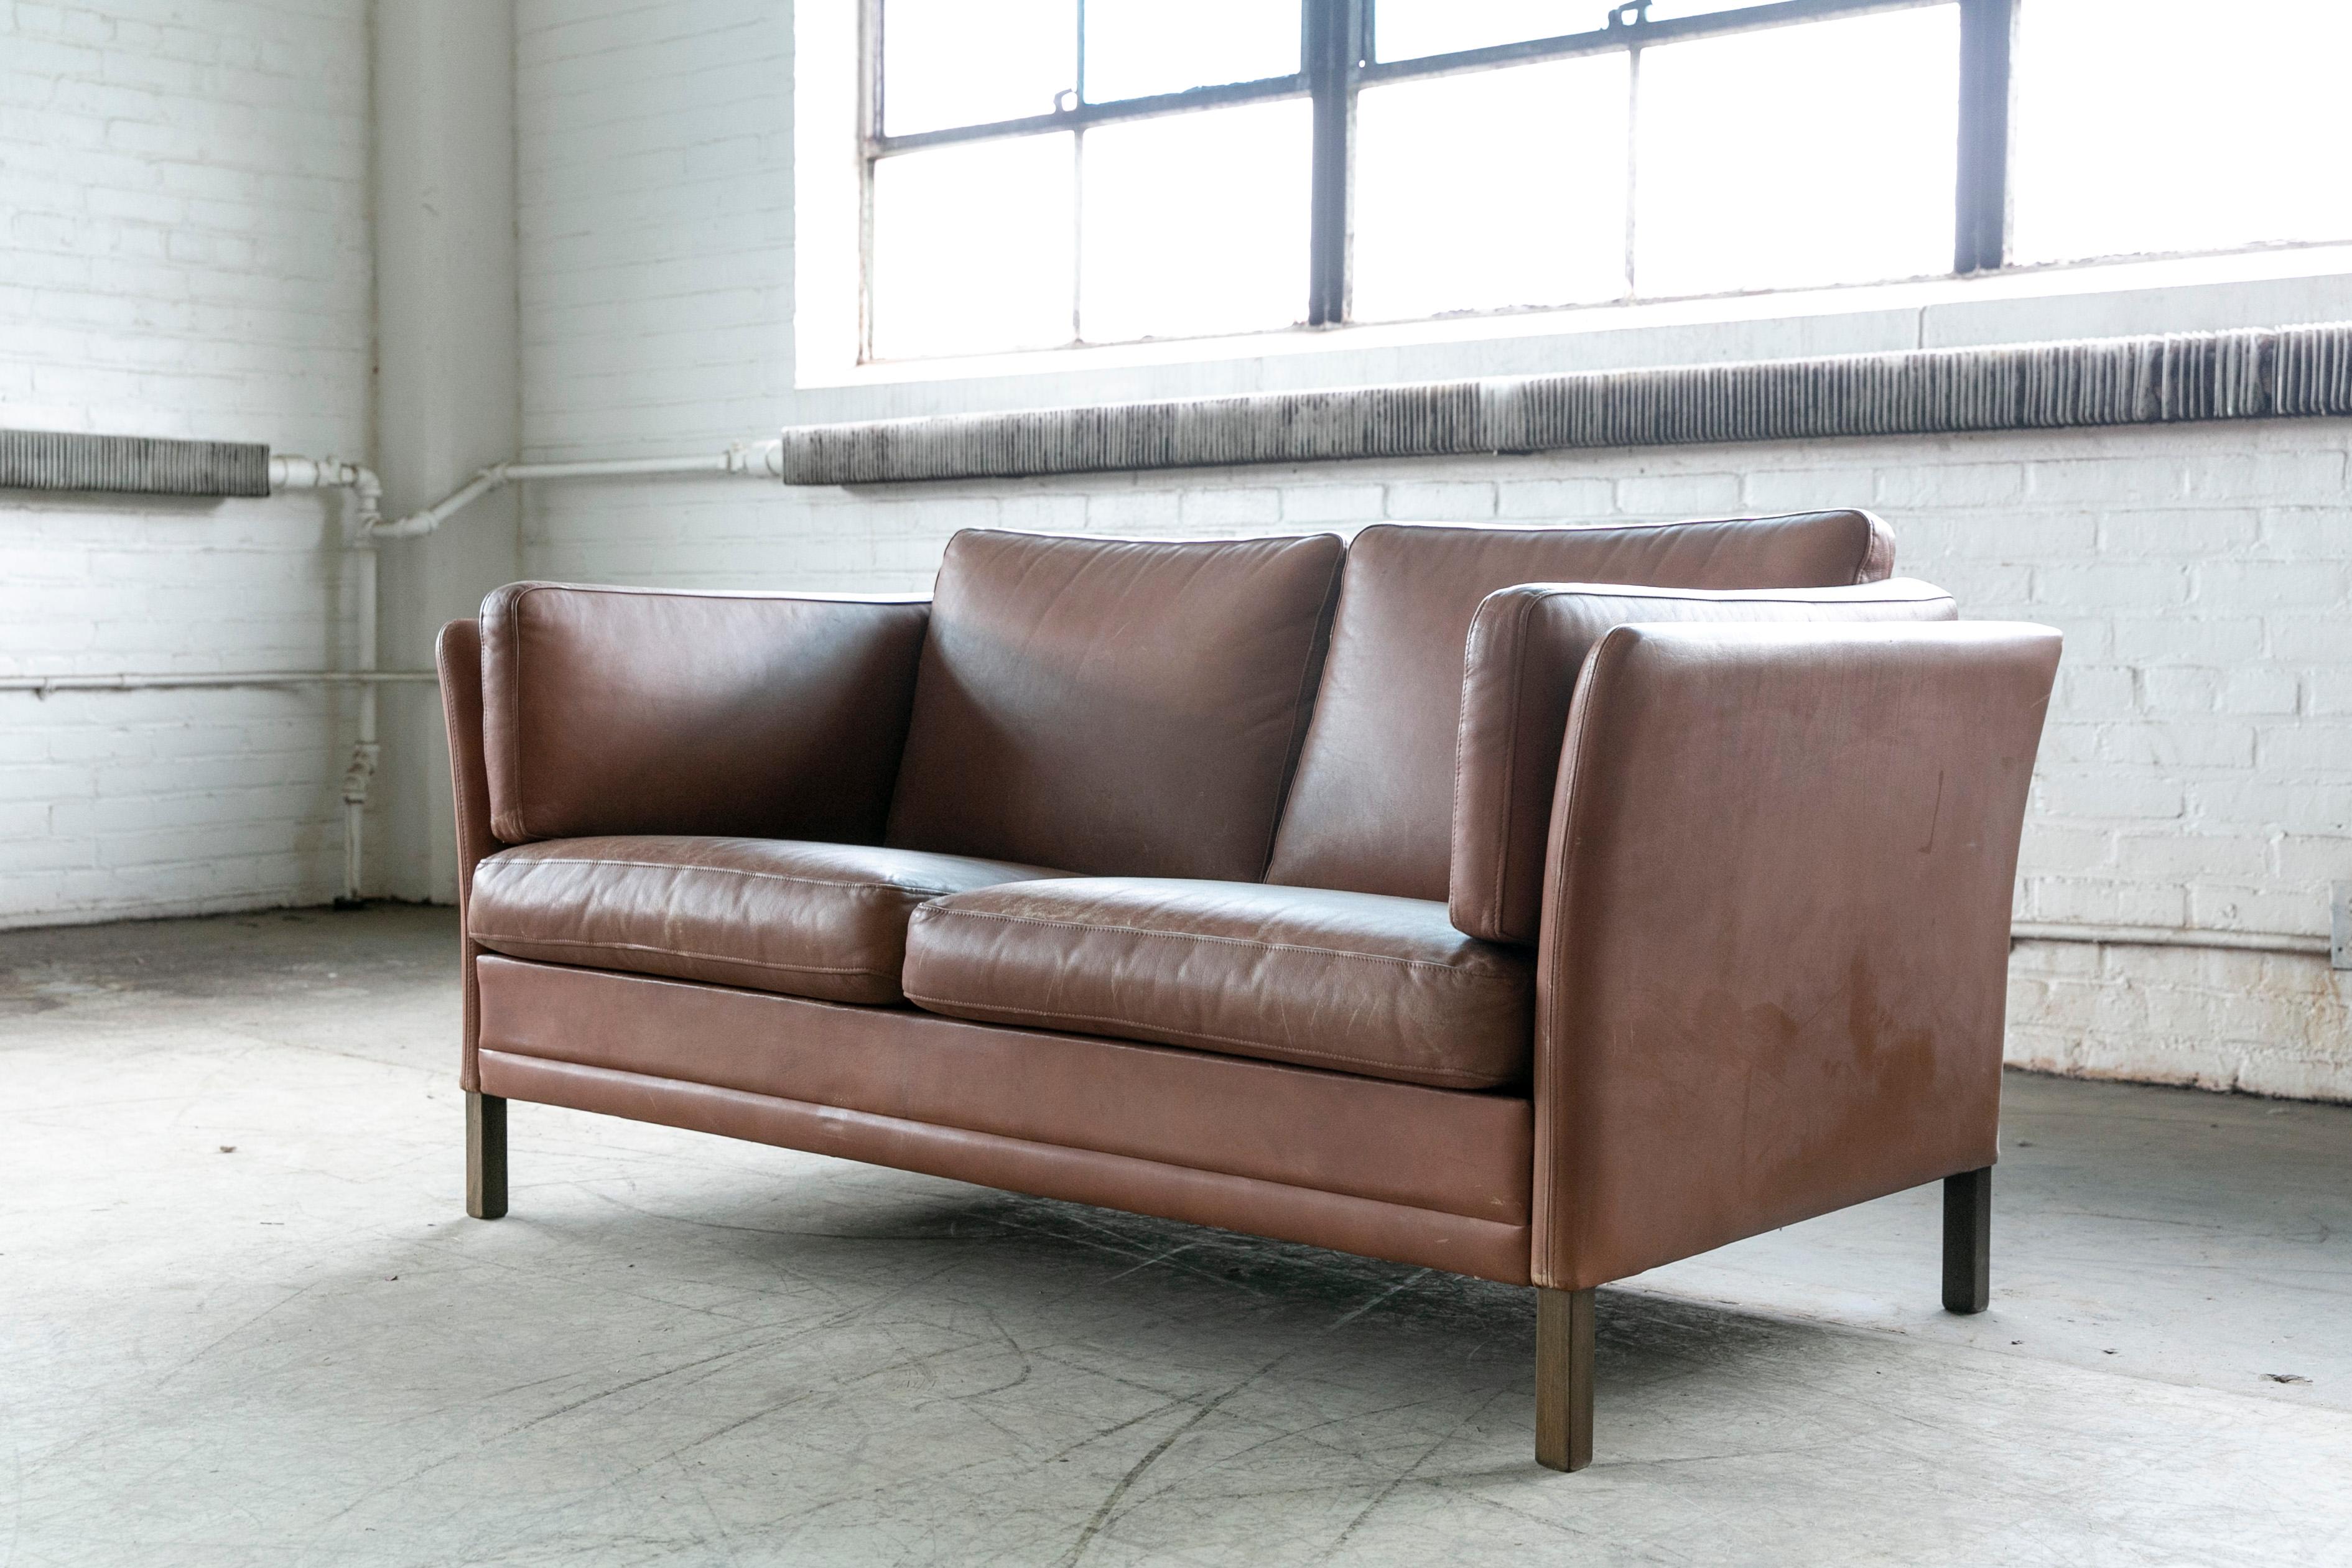 Late 20th Century Beautiful Two-Seat Cognac Colored Leather Sofa Model MH2225 by Mogens Hansen